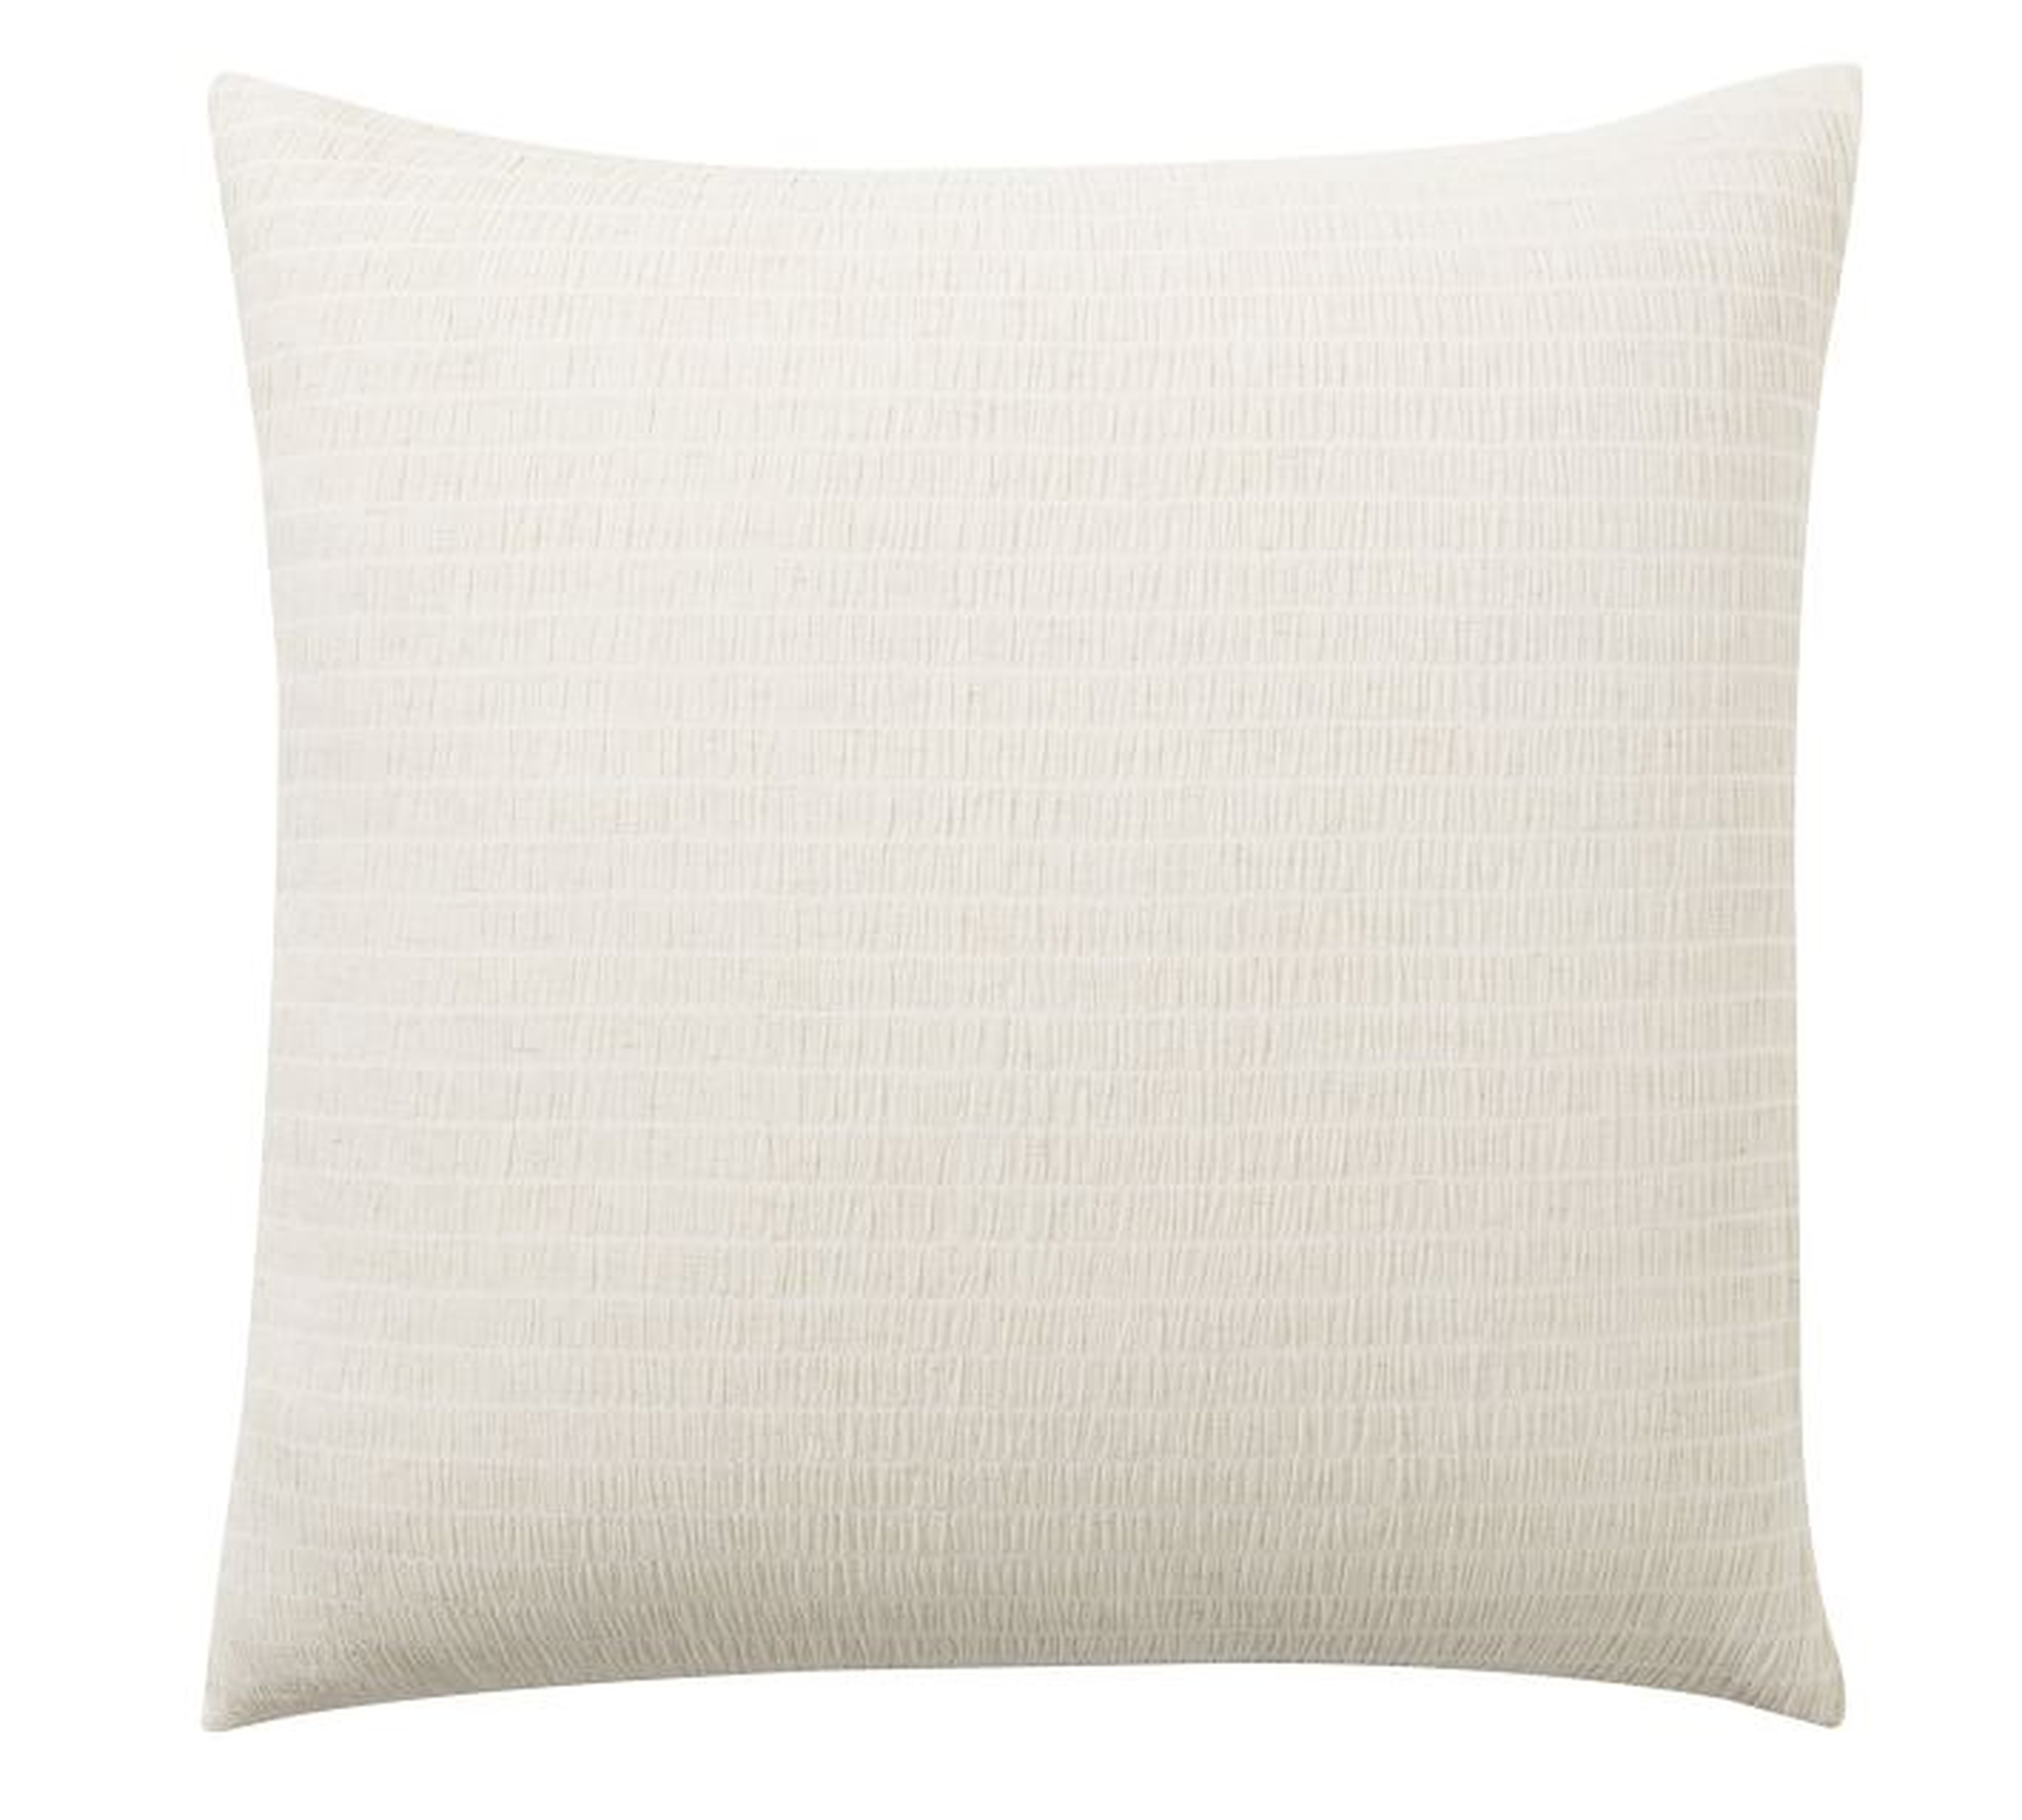 Beck Ruched Cotton Sham, Euro, Flax - Pottery Barn